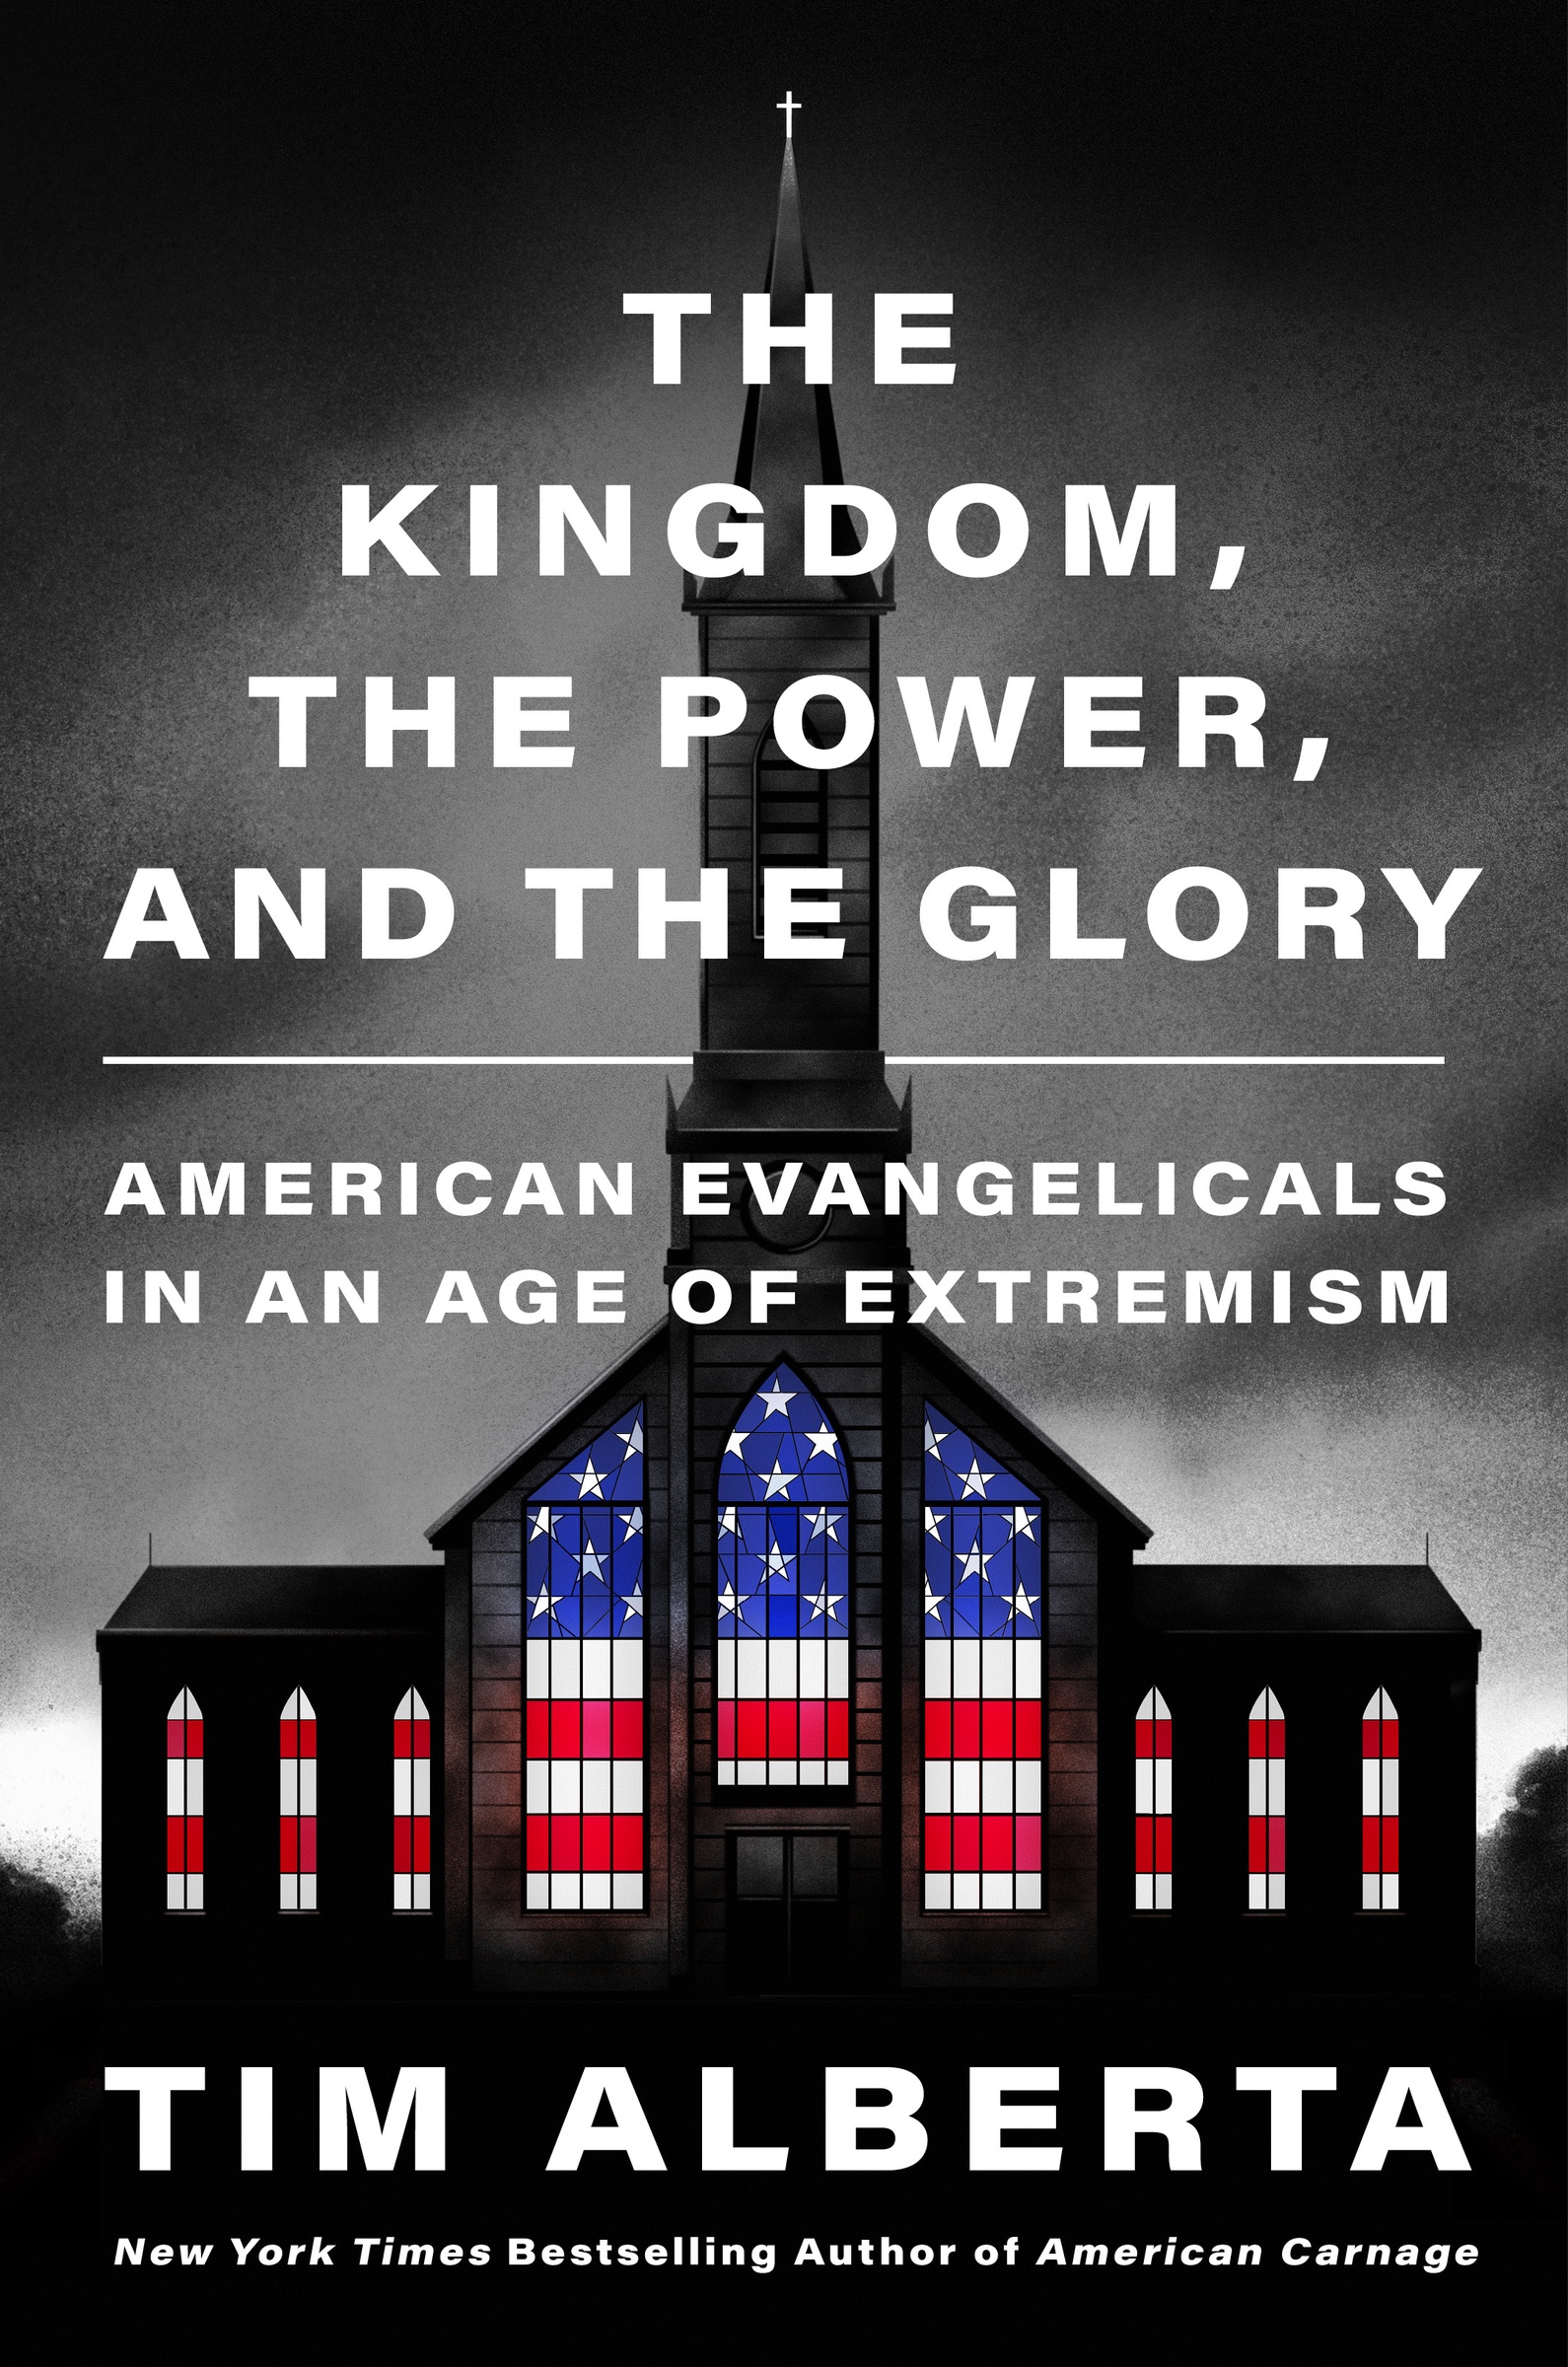 Image de couverture de The Kingdom, the Power, and the Glory [electronic resource] : American Evangelicals in an Age of Extremism